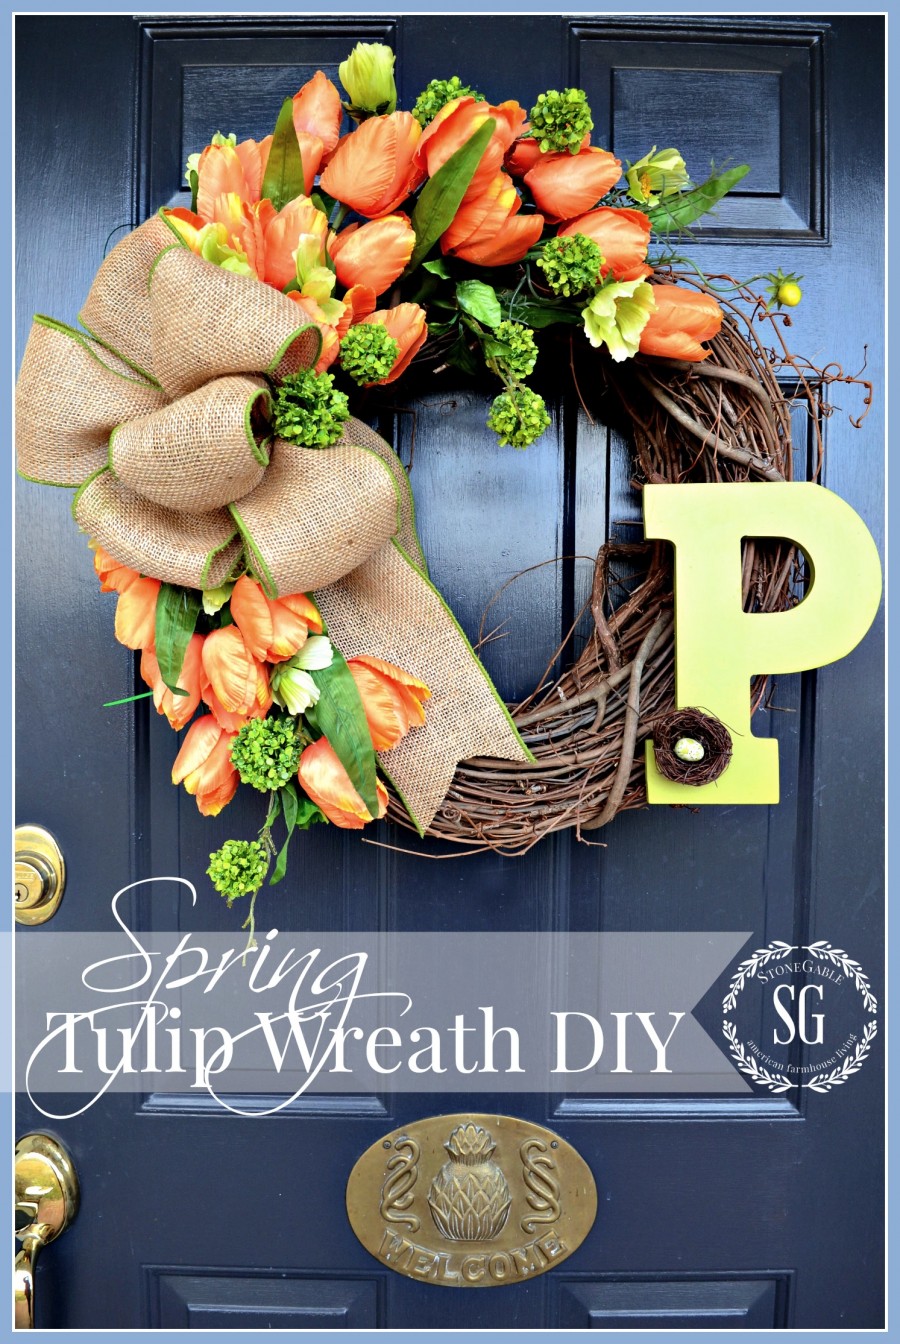 SPRING TULIP WREATH DIY-Dress your door this year with a WOW factor wreath-stonegableblog.com